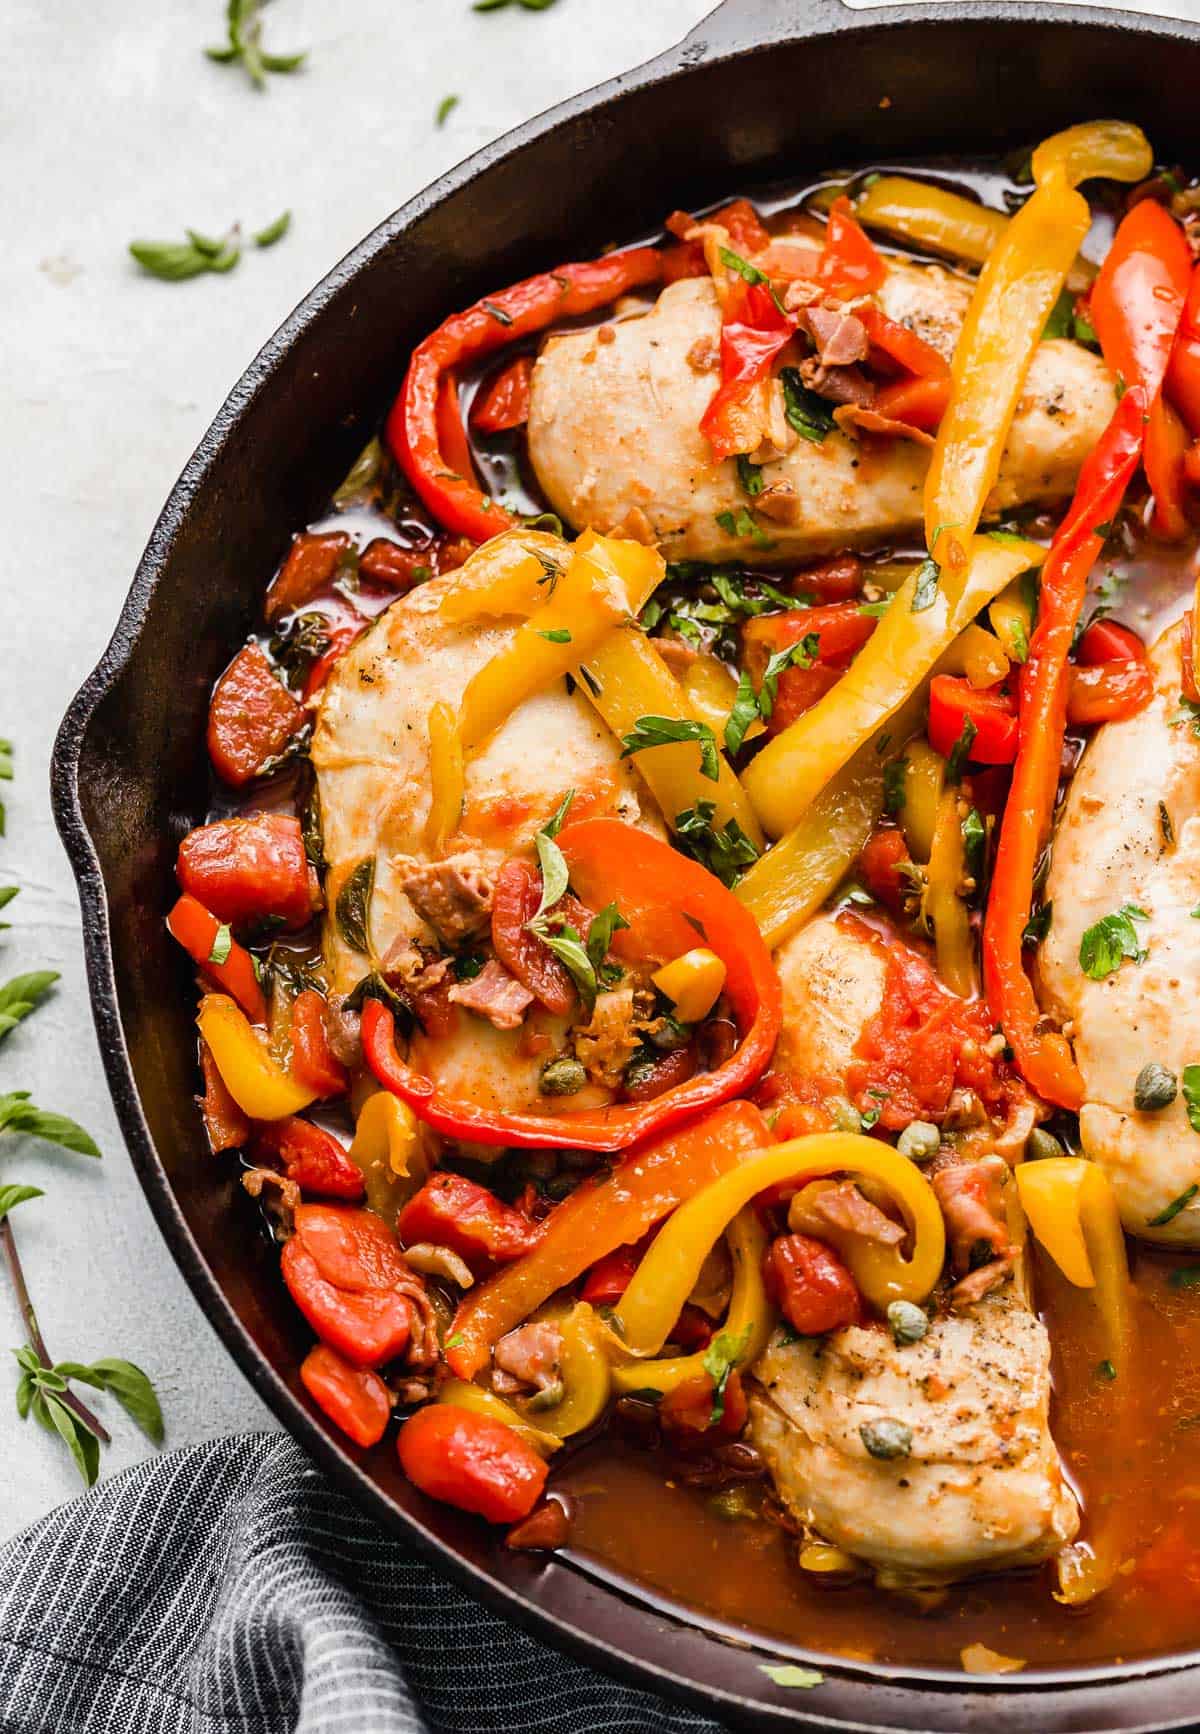 Skillet Roman Chicken recipe in a black skillet with sliced red and yellow peppers, fresh herbs, and capers.